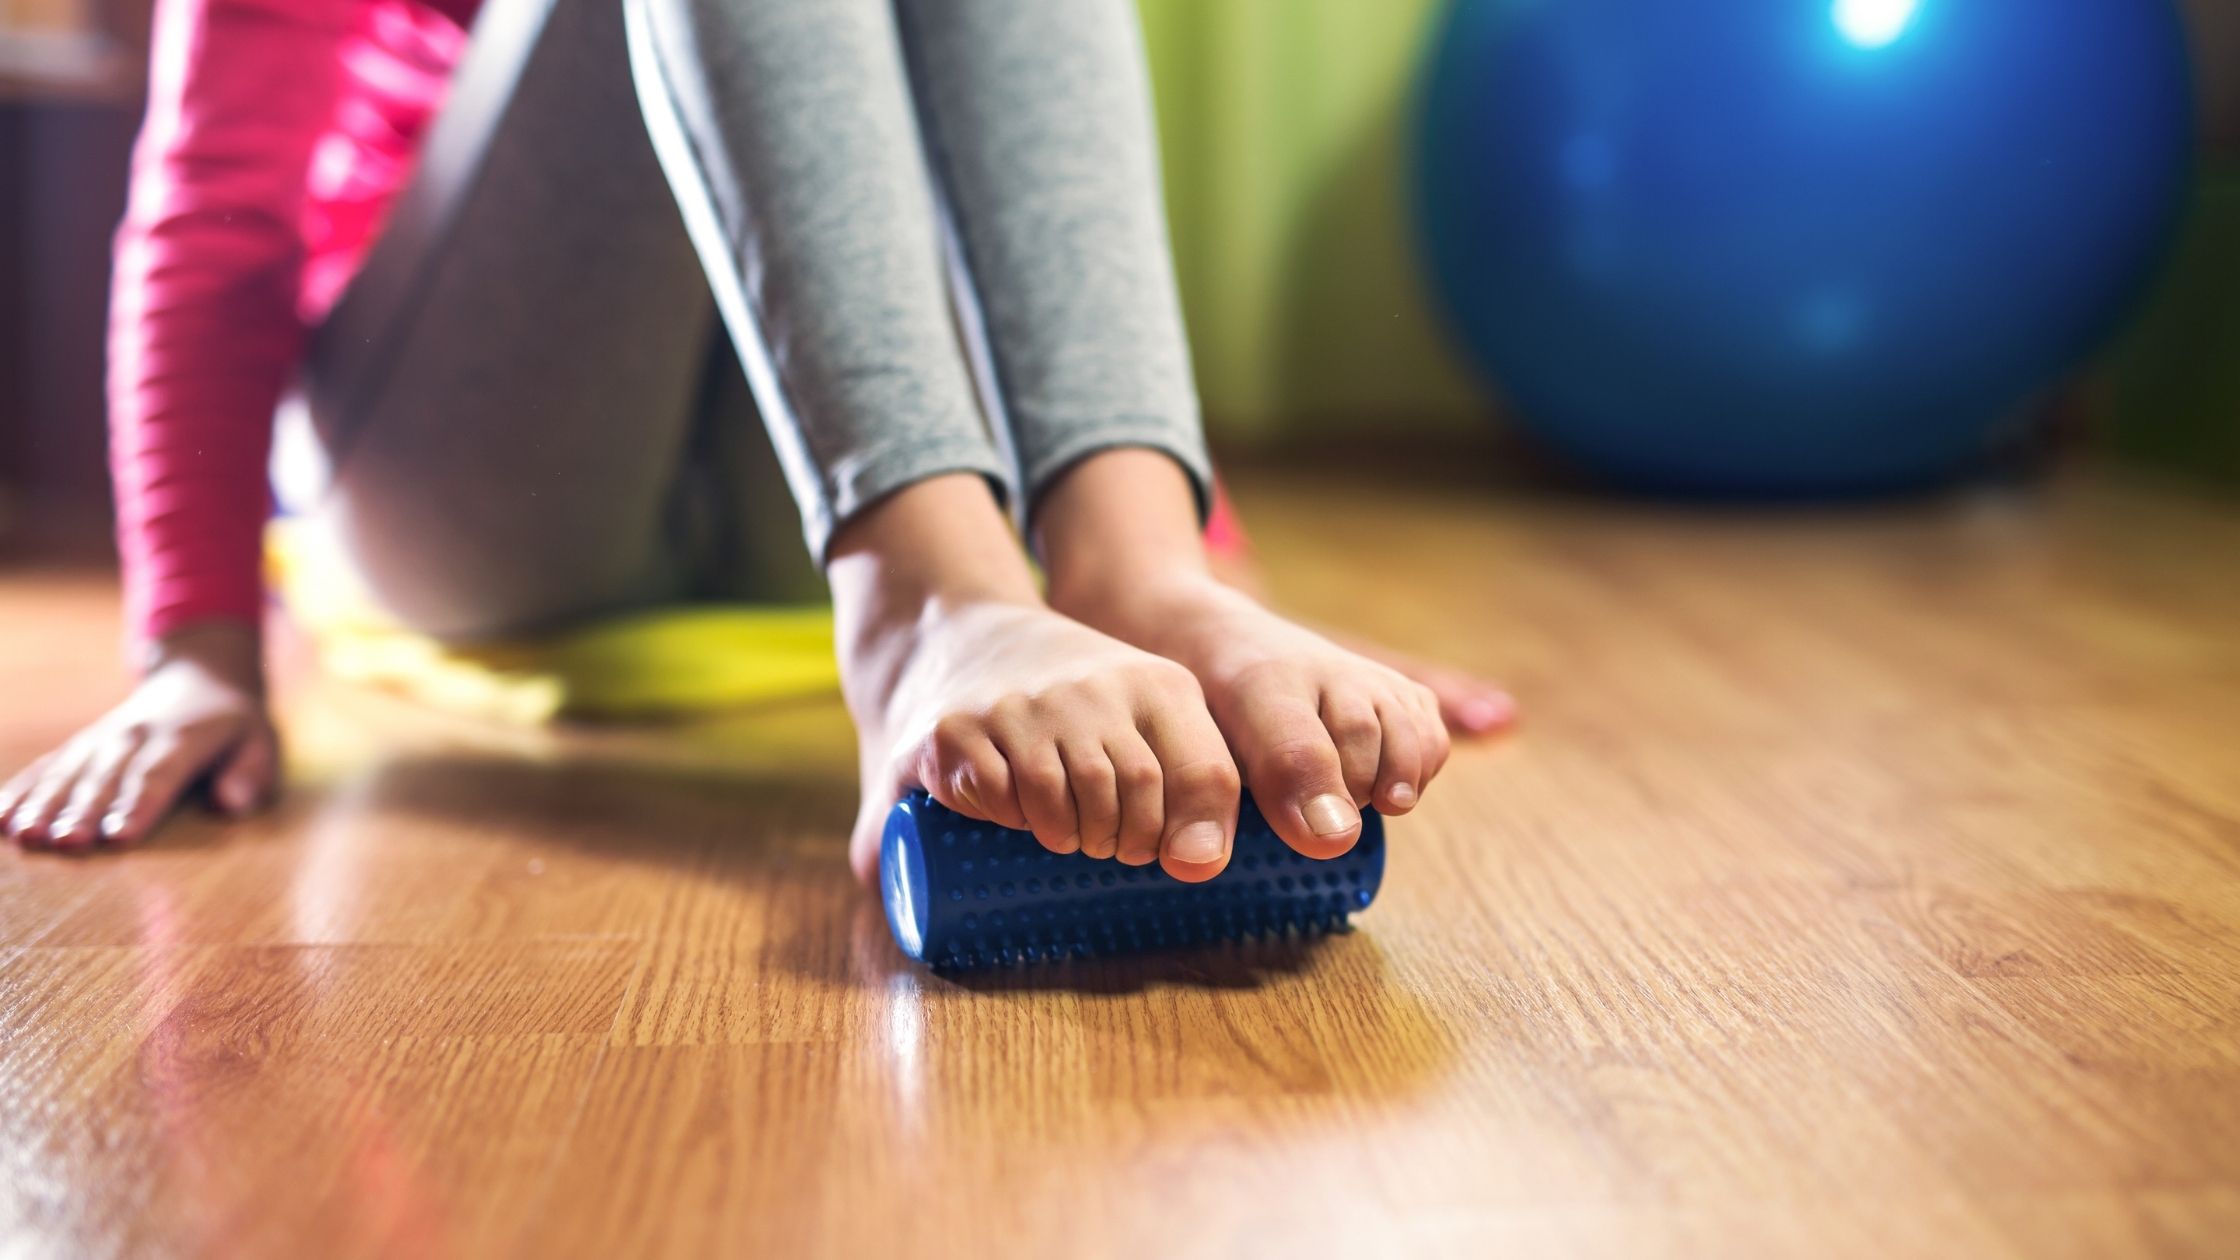 Expert Podiatrists Share the Causes and Treatments for the Flat Feet ...